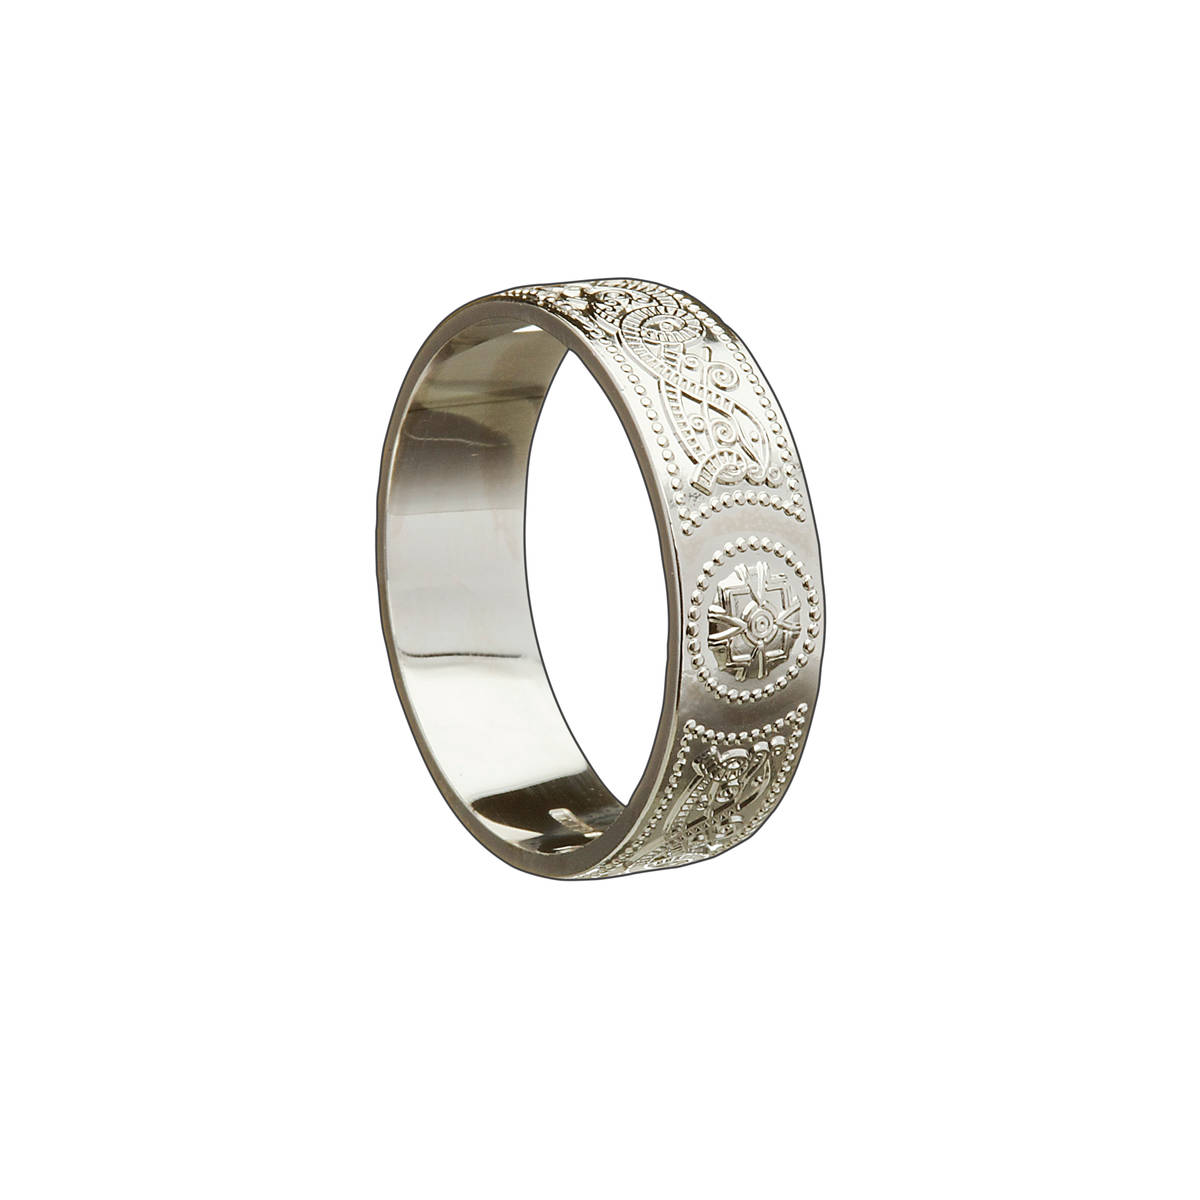 14 carat light white gold man's&nbsp;Arda chalice inspired 6.8mm approx.wide ring.A very practical everyday Celtic ring with great detail.